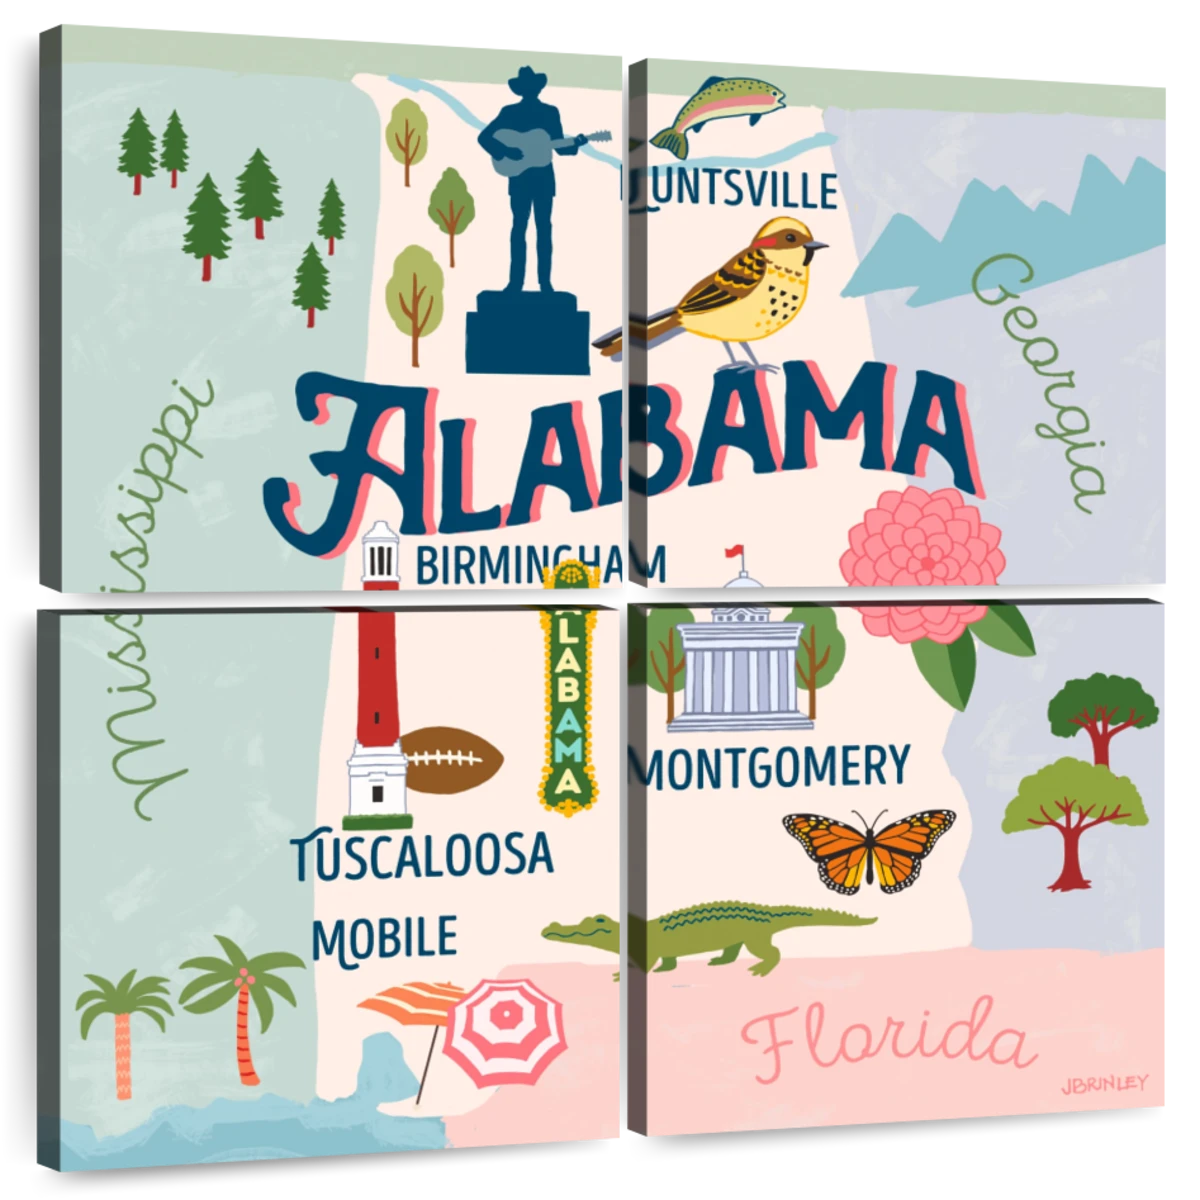 https://cdn.shopify.com/s/files/1/1568/8443/products/xyt_art_tuq_layout_4_square_state-maps-alabama-attractions-4-piece-wall-art.webp?v=1668564659